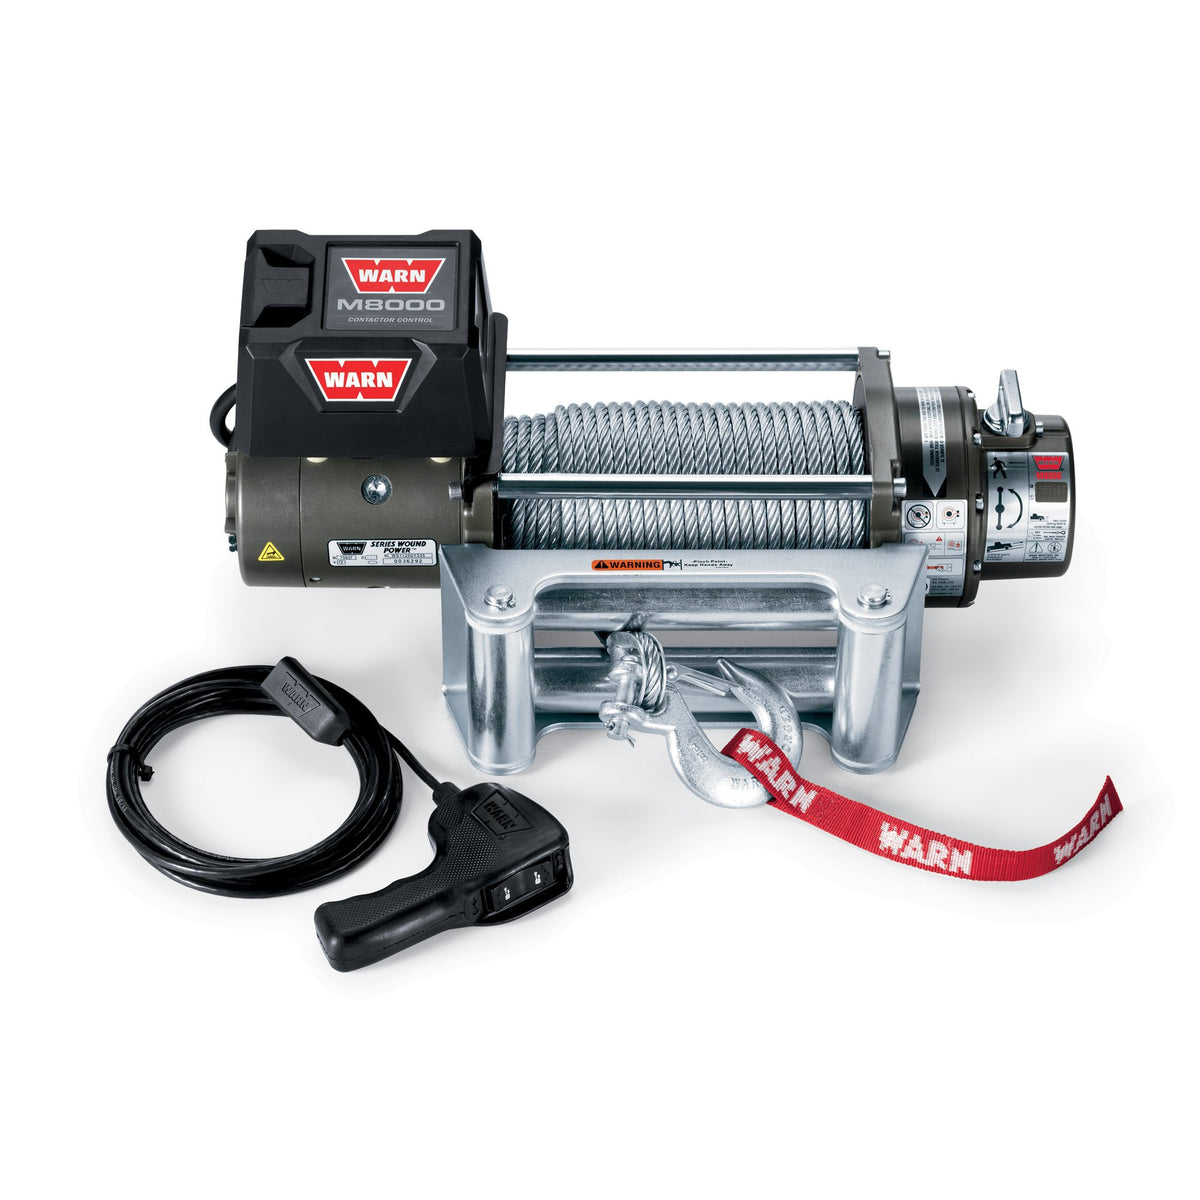 WARN 26502 M8000 Self-Recovery Winch (12V DC) 100&#39; Wire Rope and Roller Fairlead